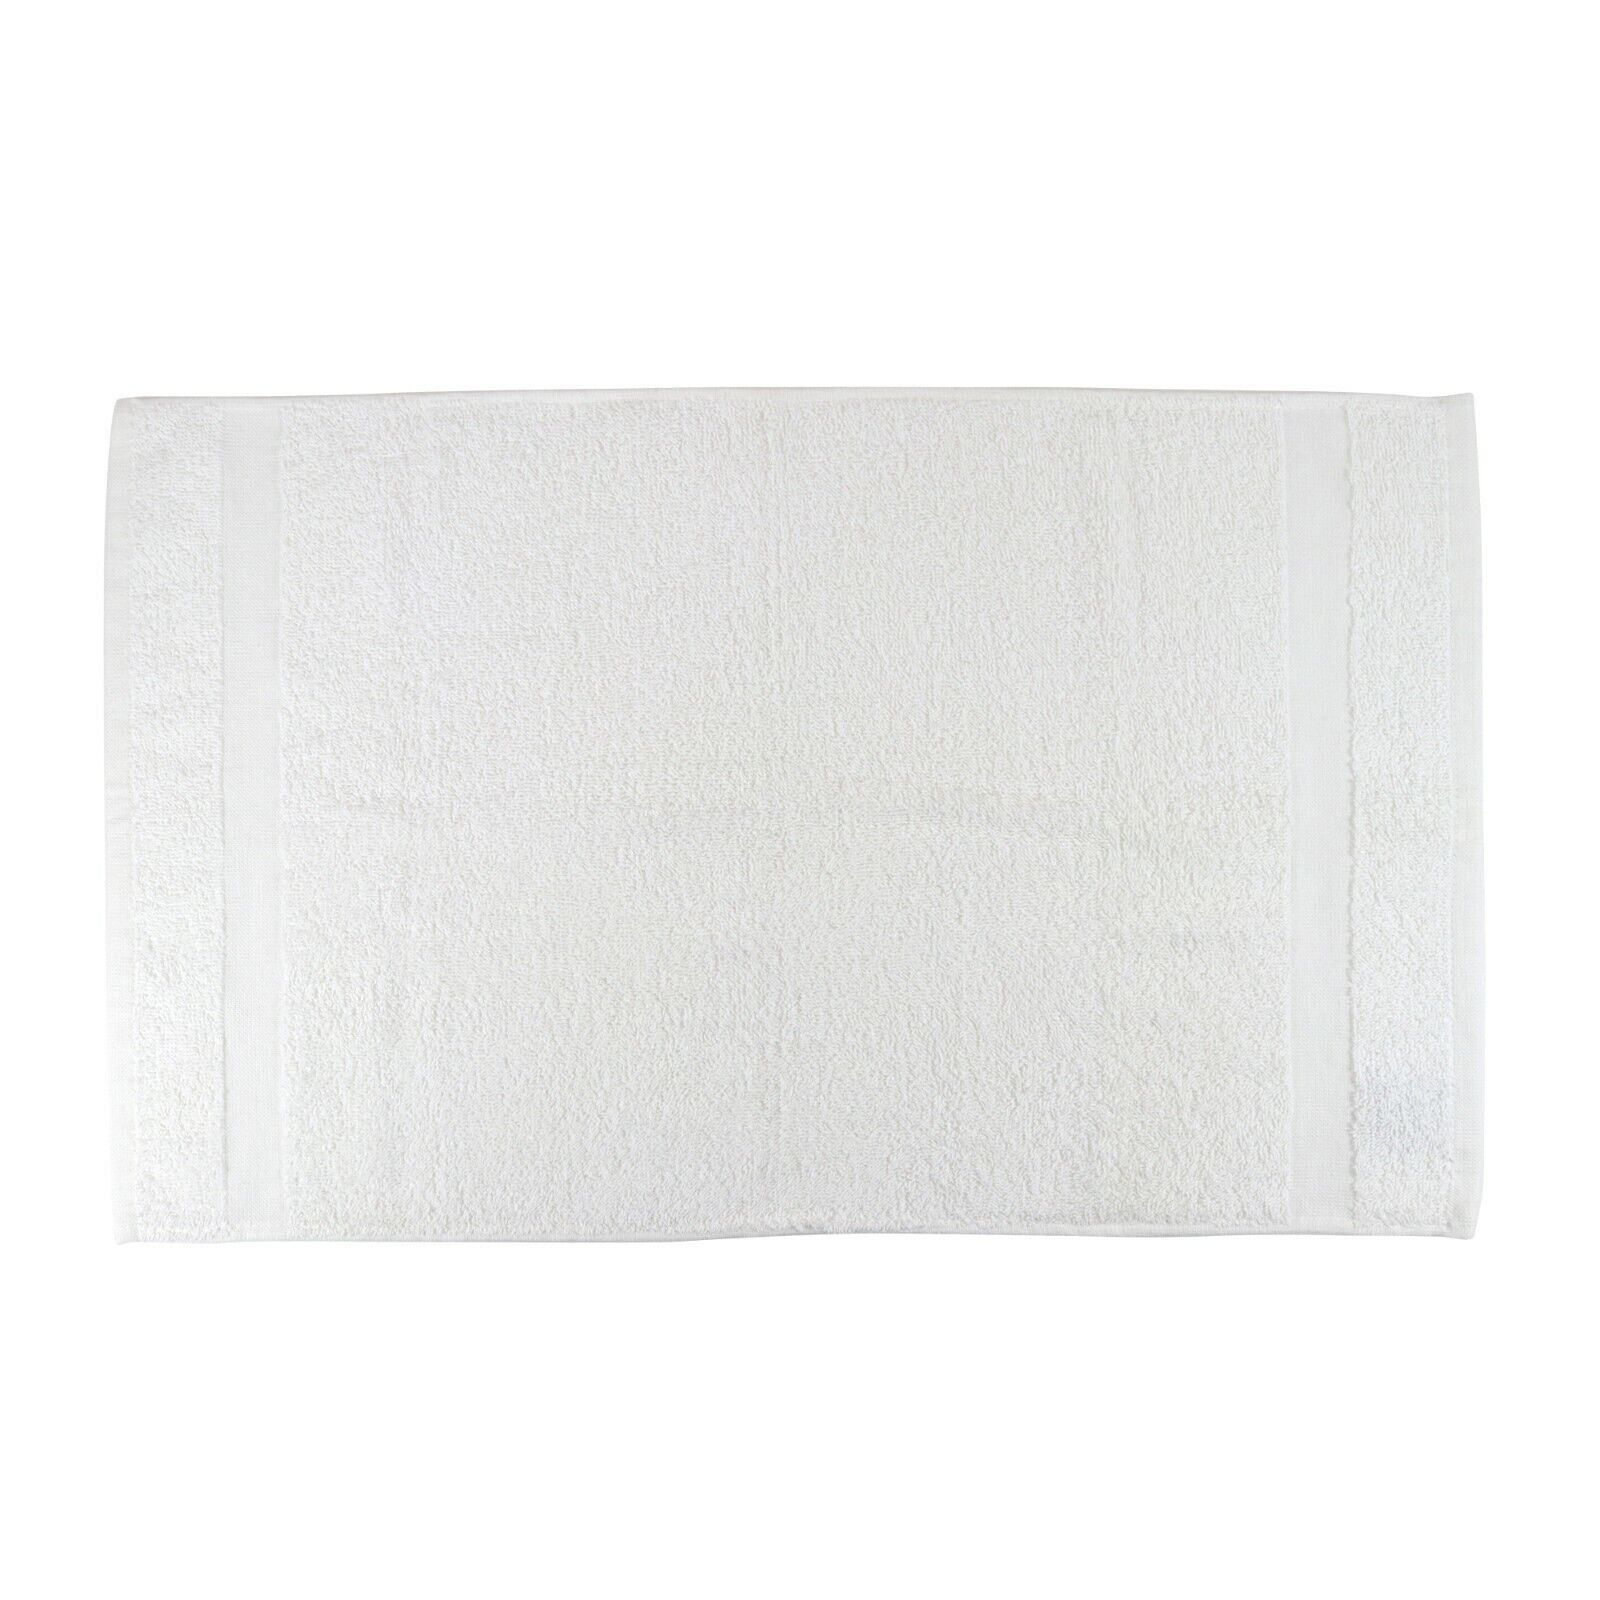 12 Pack of Admiral Hand Towels - White - 16 x 27 - Bulk Bathroom Cotton Towels  Arkwright - фотография #4